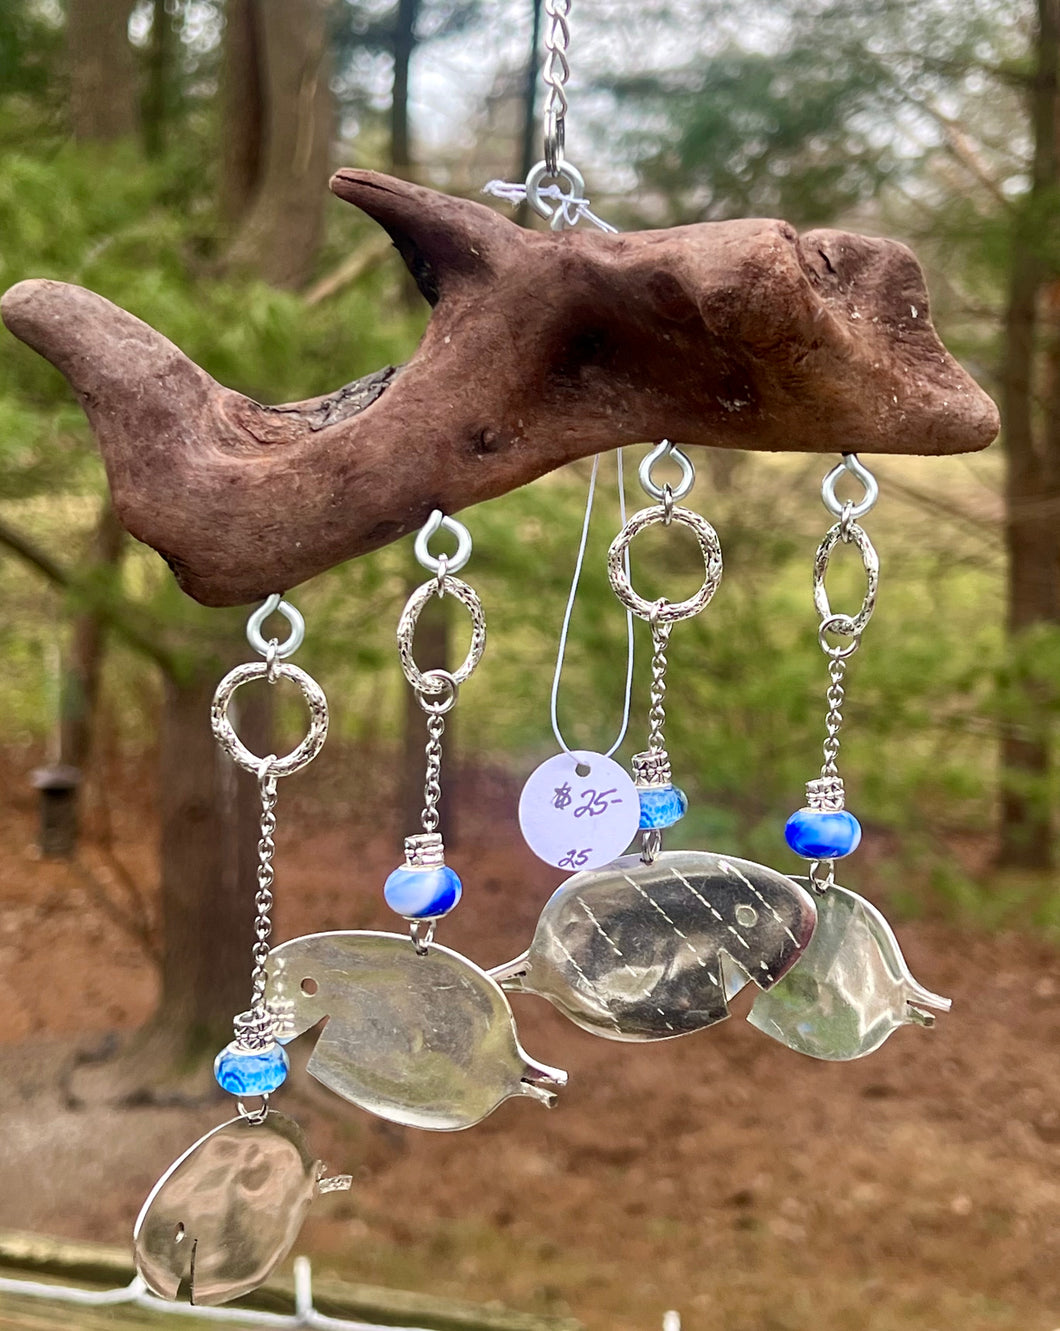 Spoon Fish & Driftwood Wind Chime #25